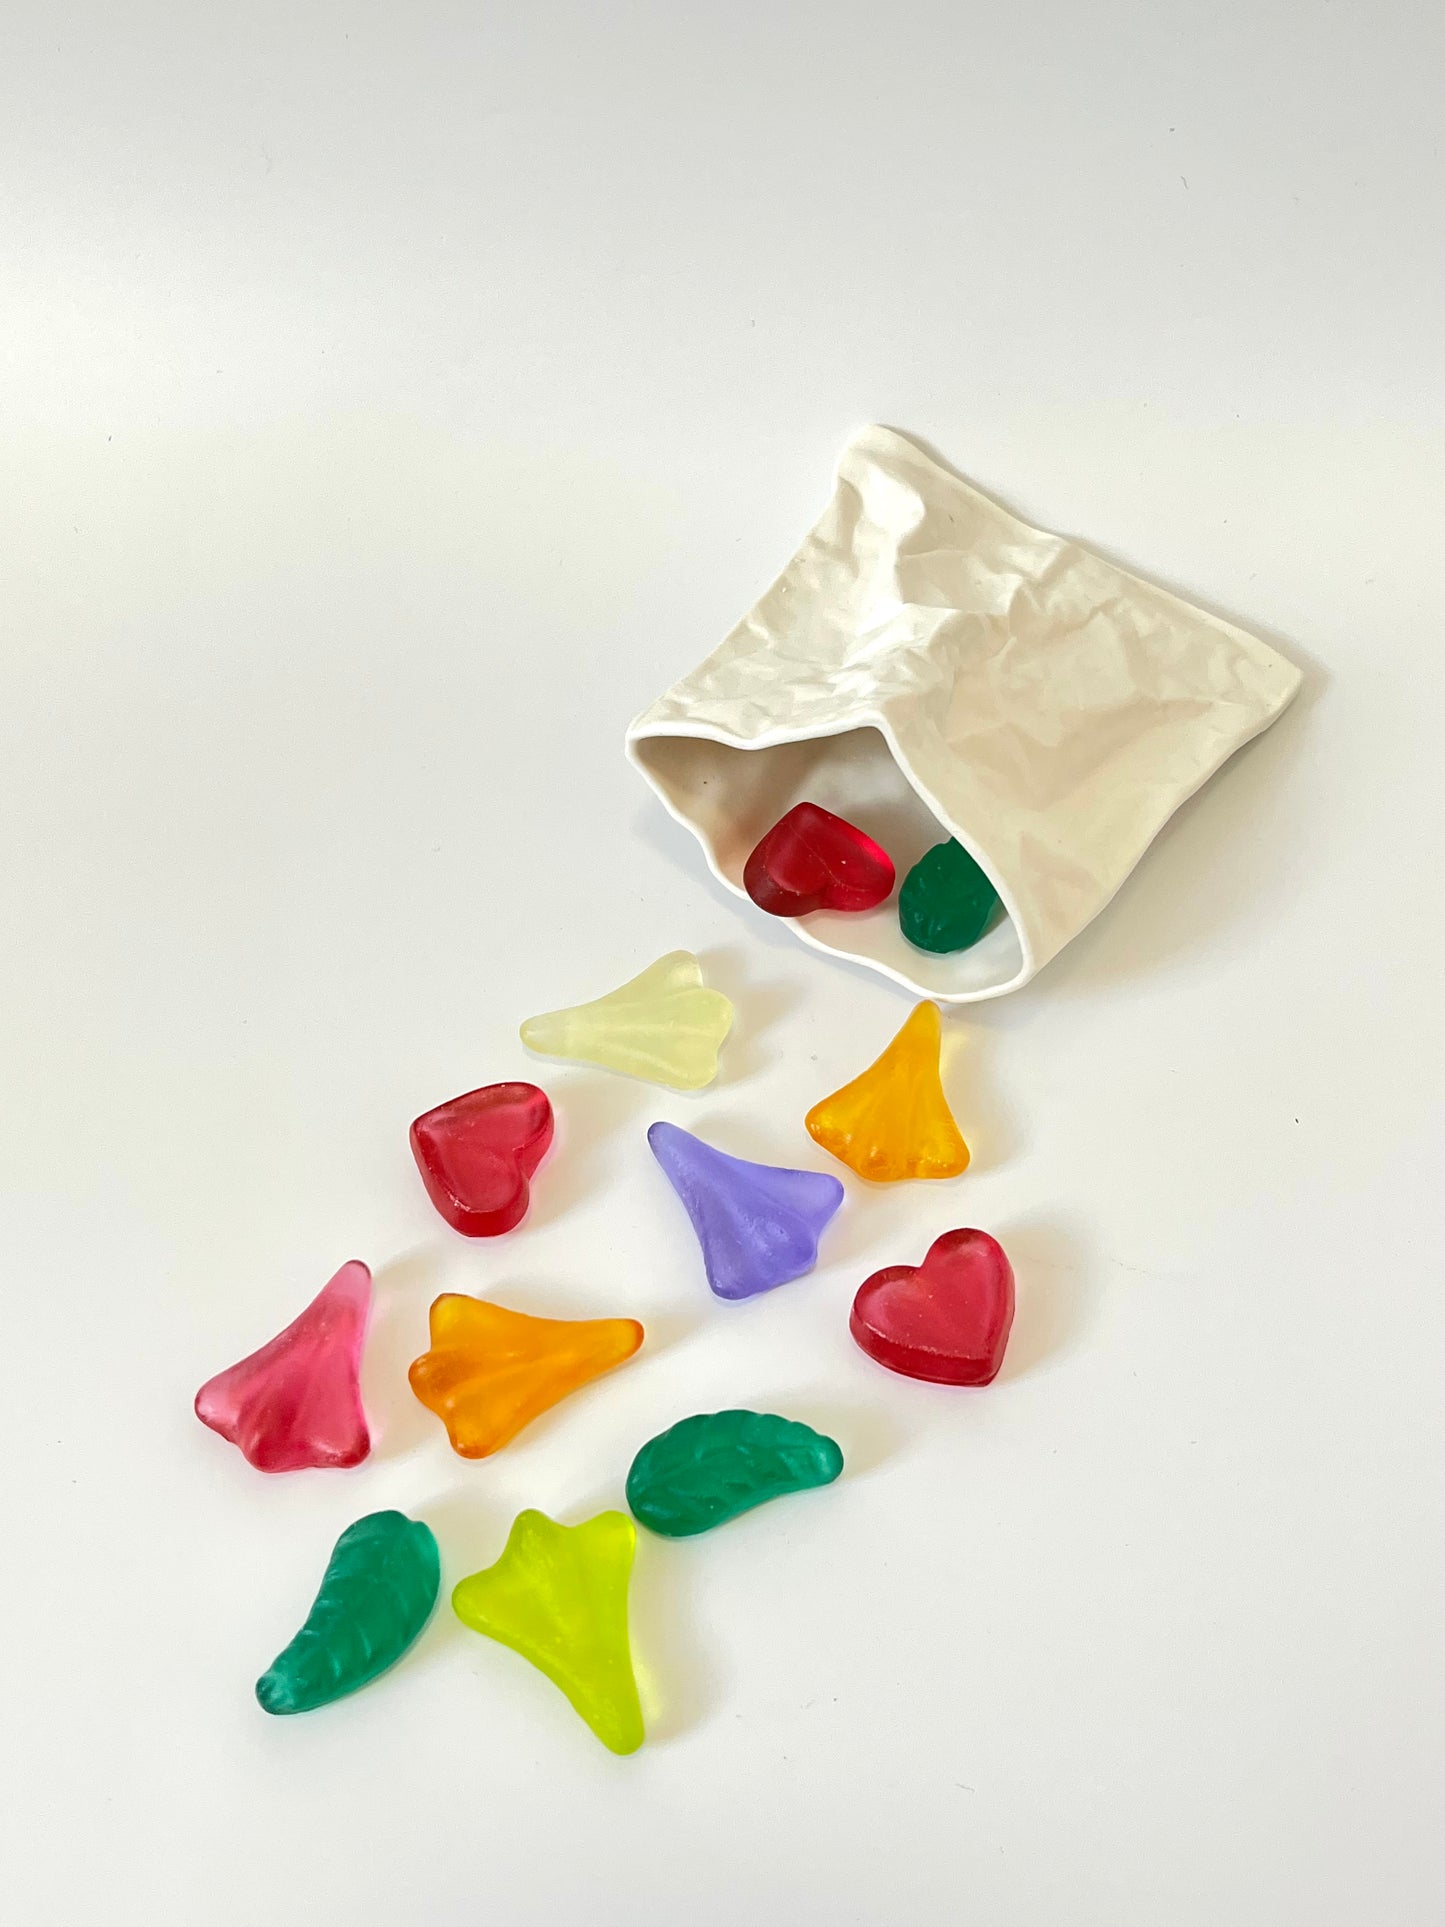 "Lolly Bag & Mixed Lollies" in Porcelain & Glass